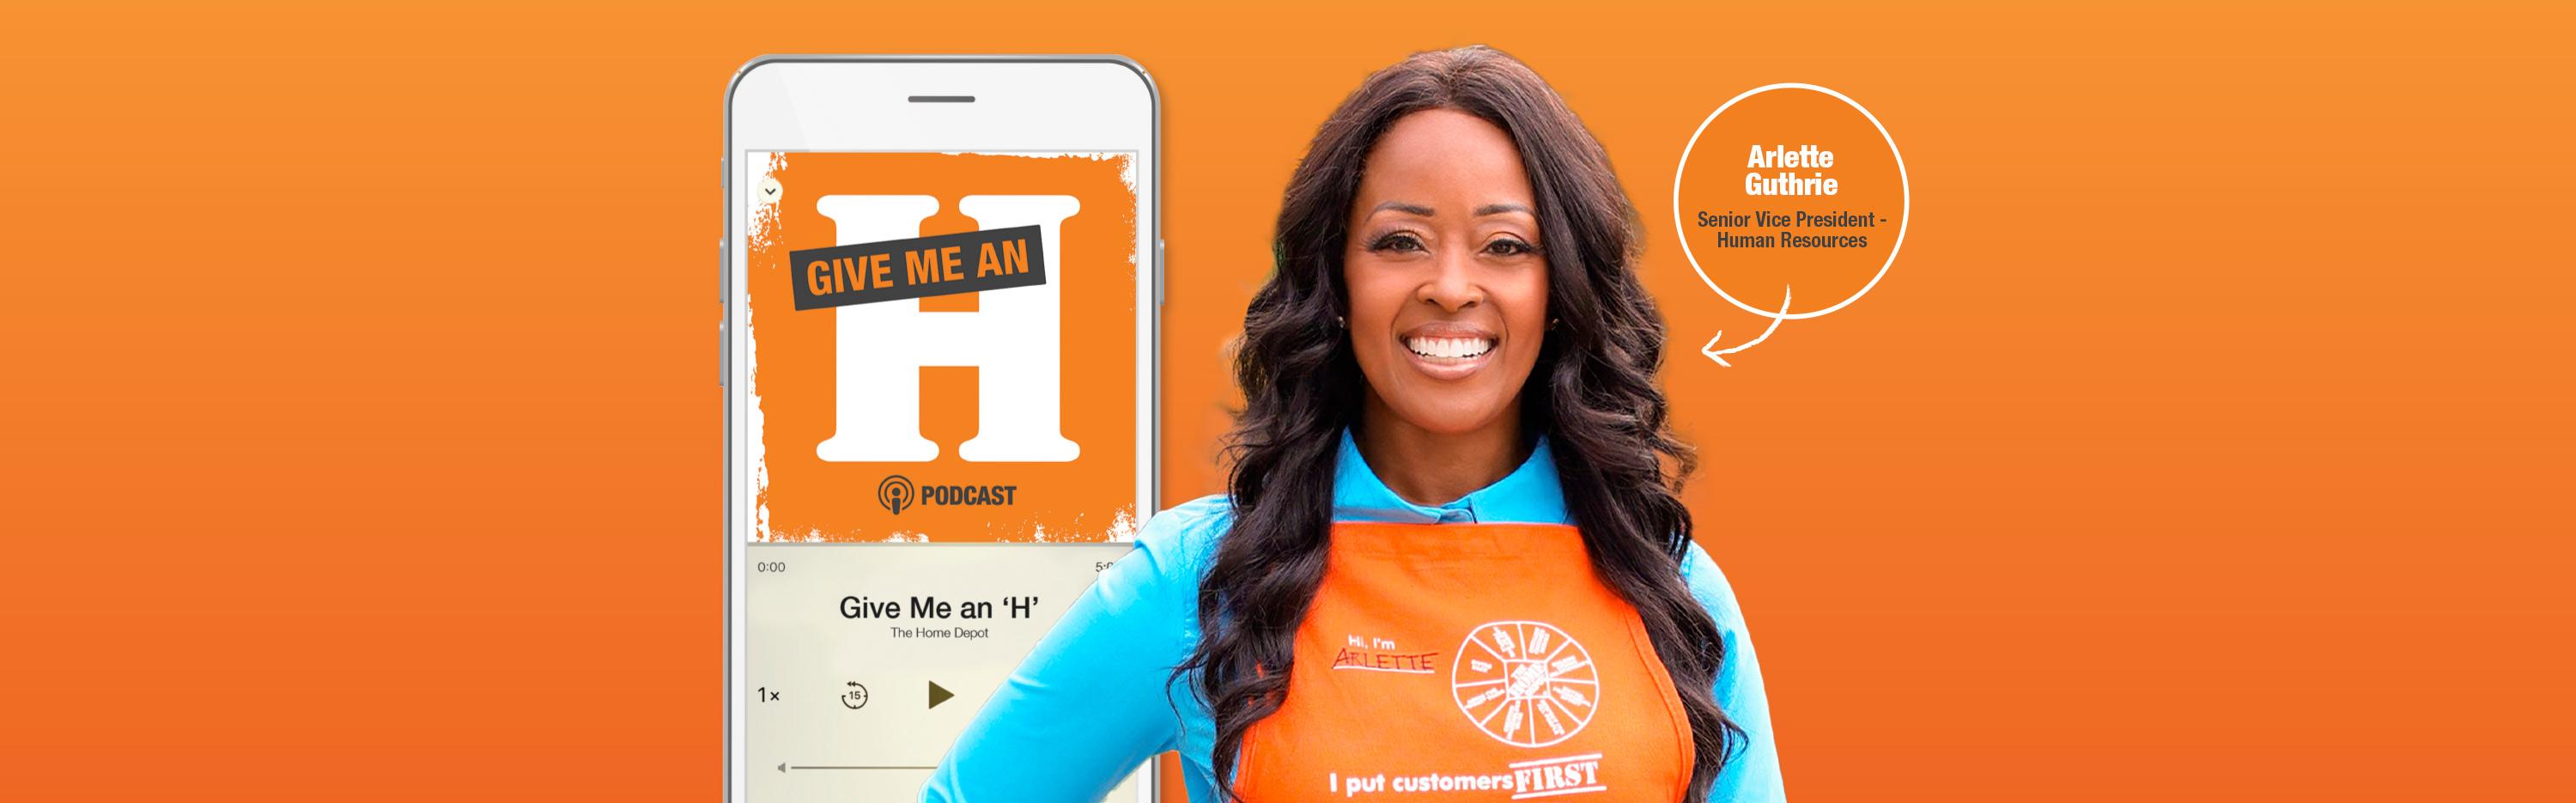 Give Me an H: Arlette Guthrie Talks Work-Life Balance and Home Depot Magic  | The Home Depot